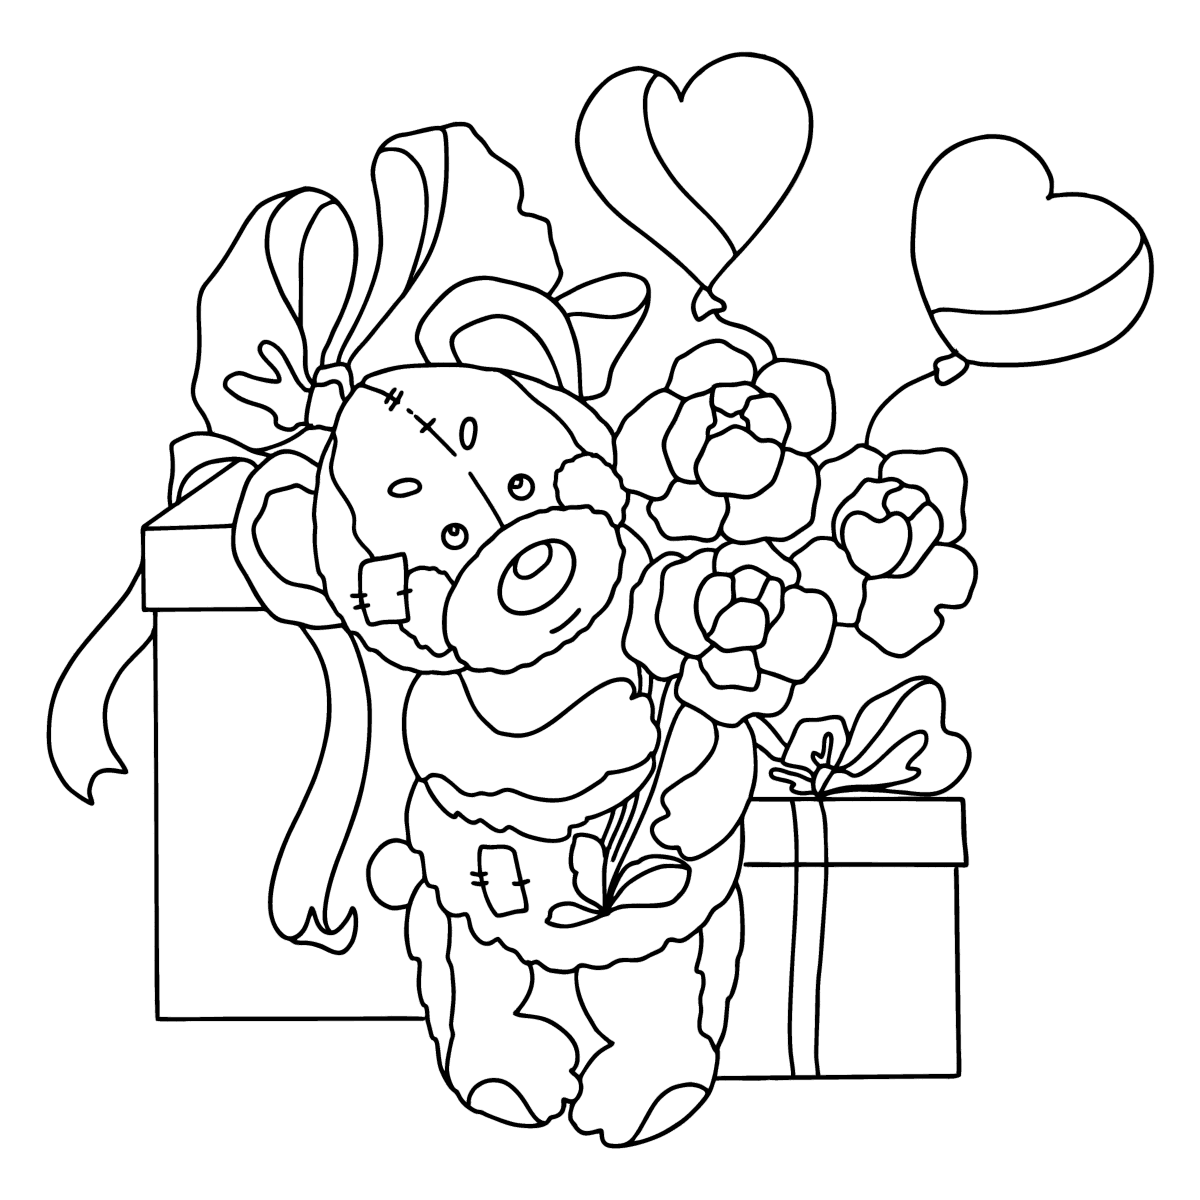 teddy-bear-valentine-s-day-coloring-pages-for-adults-online